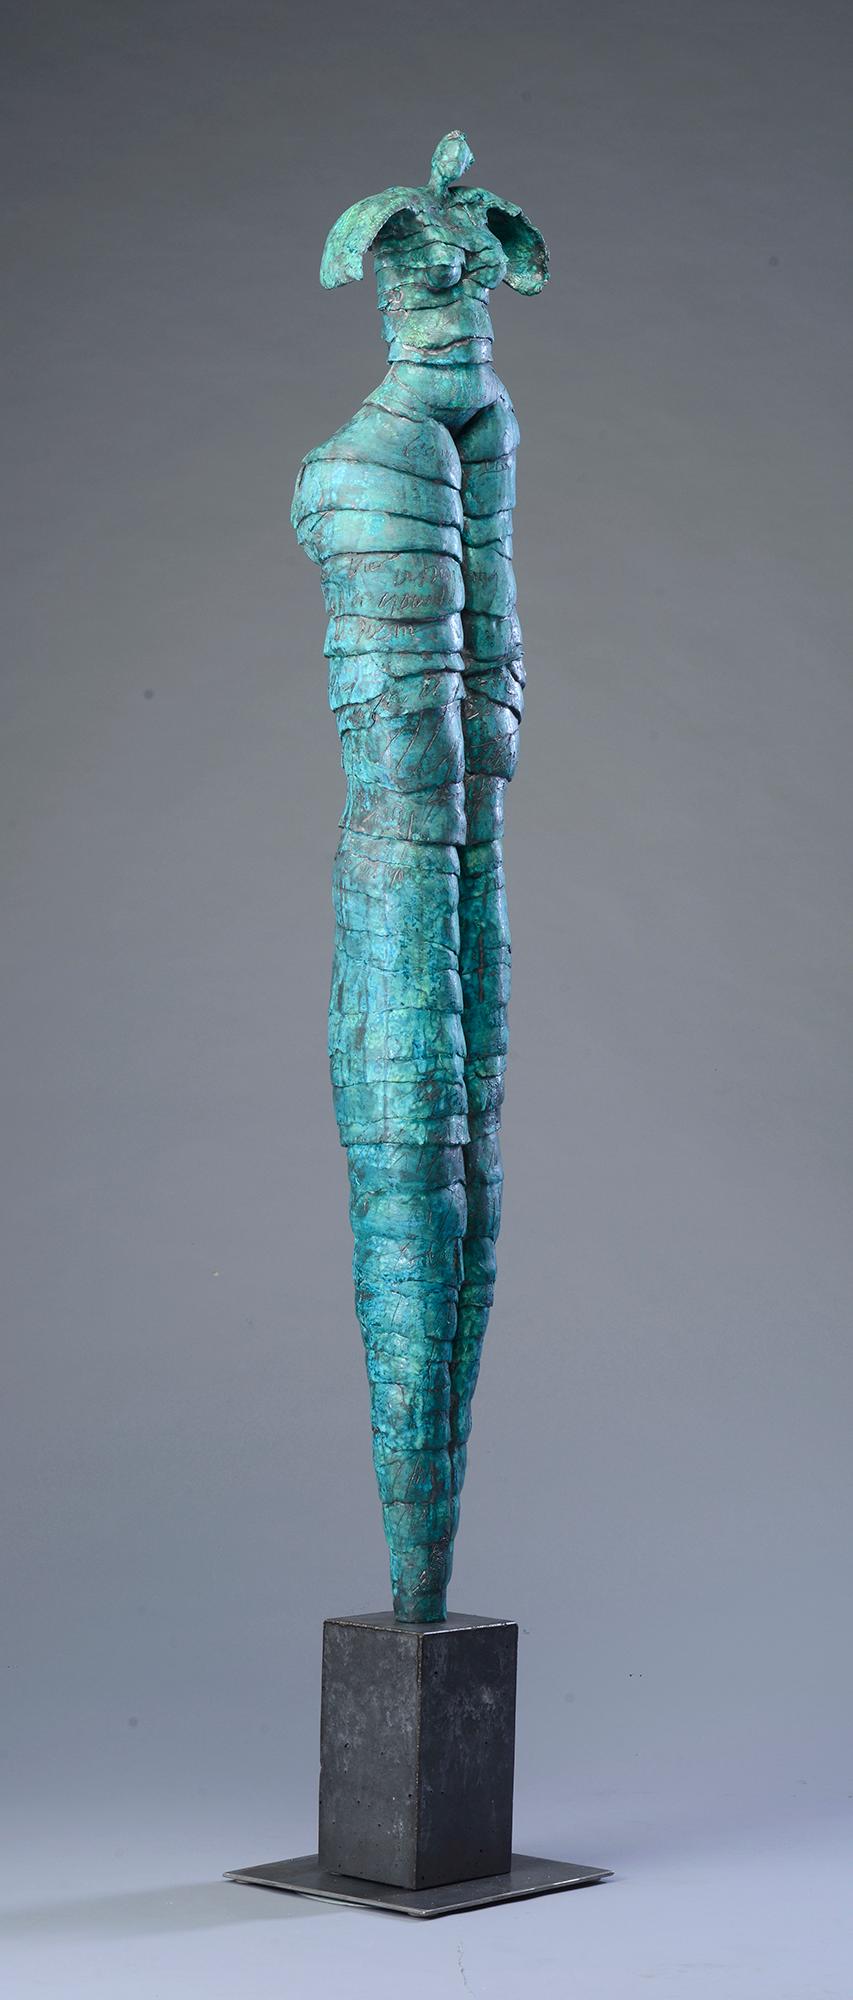 A larger than life figurative sculpture by Jane Burton. This one of a kind piece is well suited for a contemporary interior. when viewed up close, one can appreciate the handwritten script incorporated into the blue patina. The forms Burton sculpts